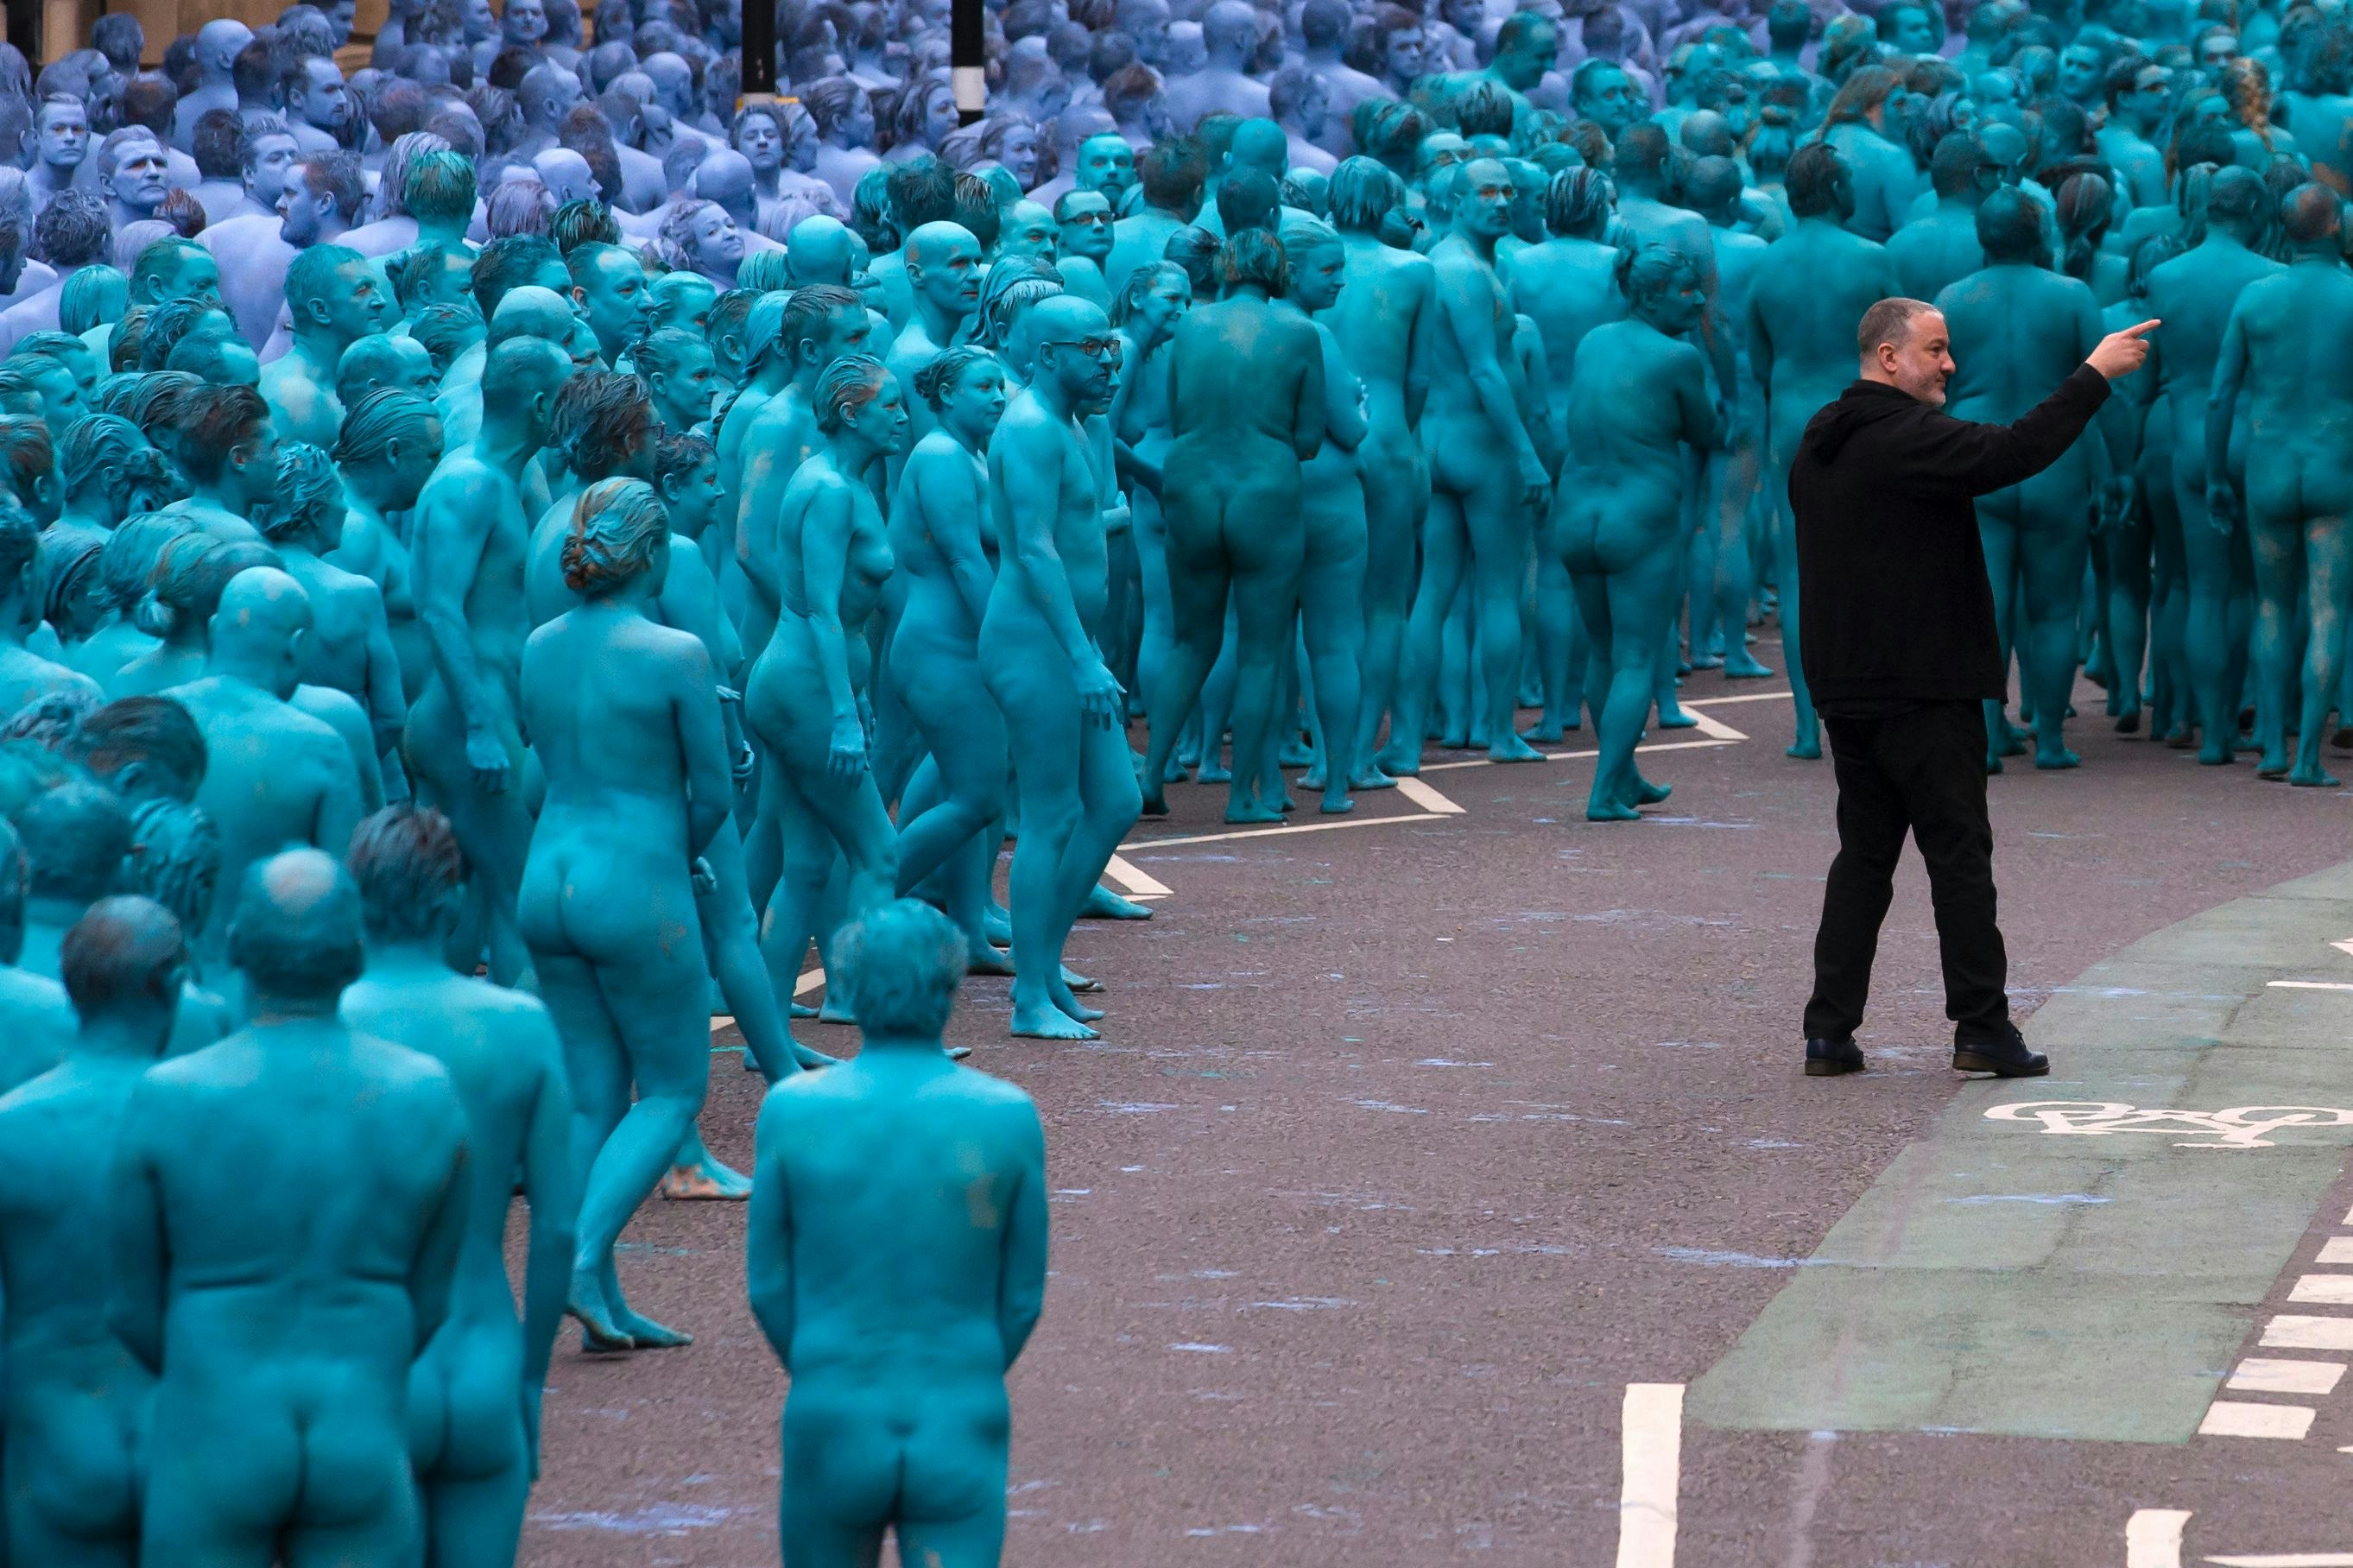 A large group of people fully naked and painted in varying shades of blue and purple stand on a city street as photographer Spencer Tunick points to someone off the image